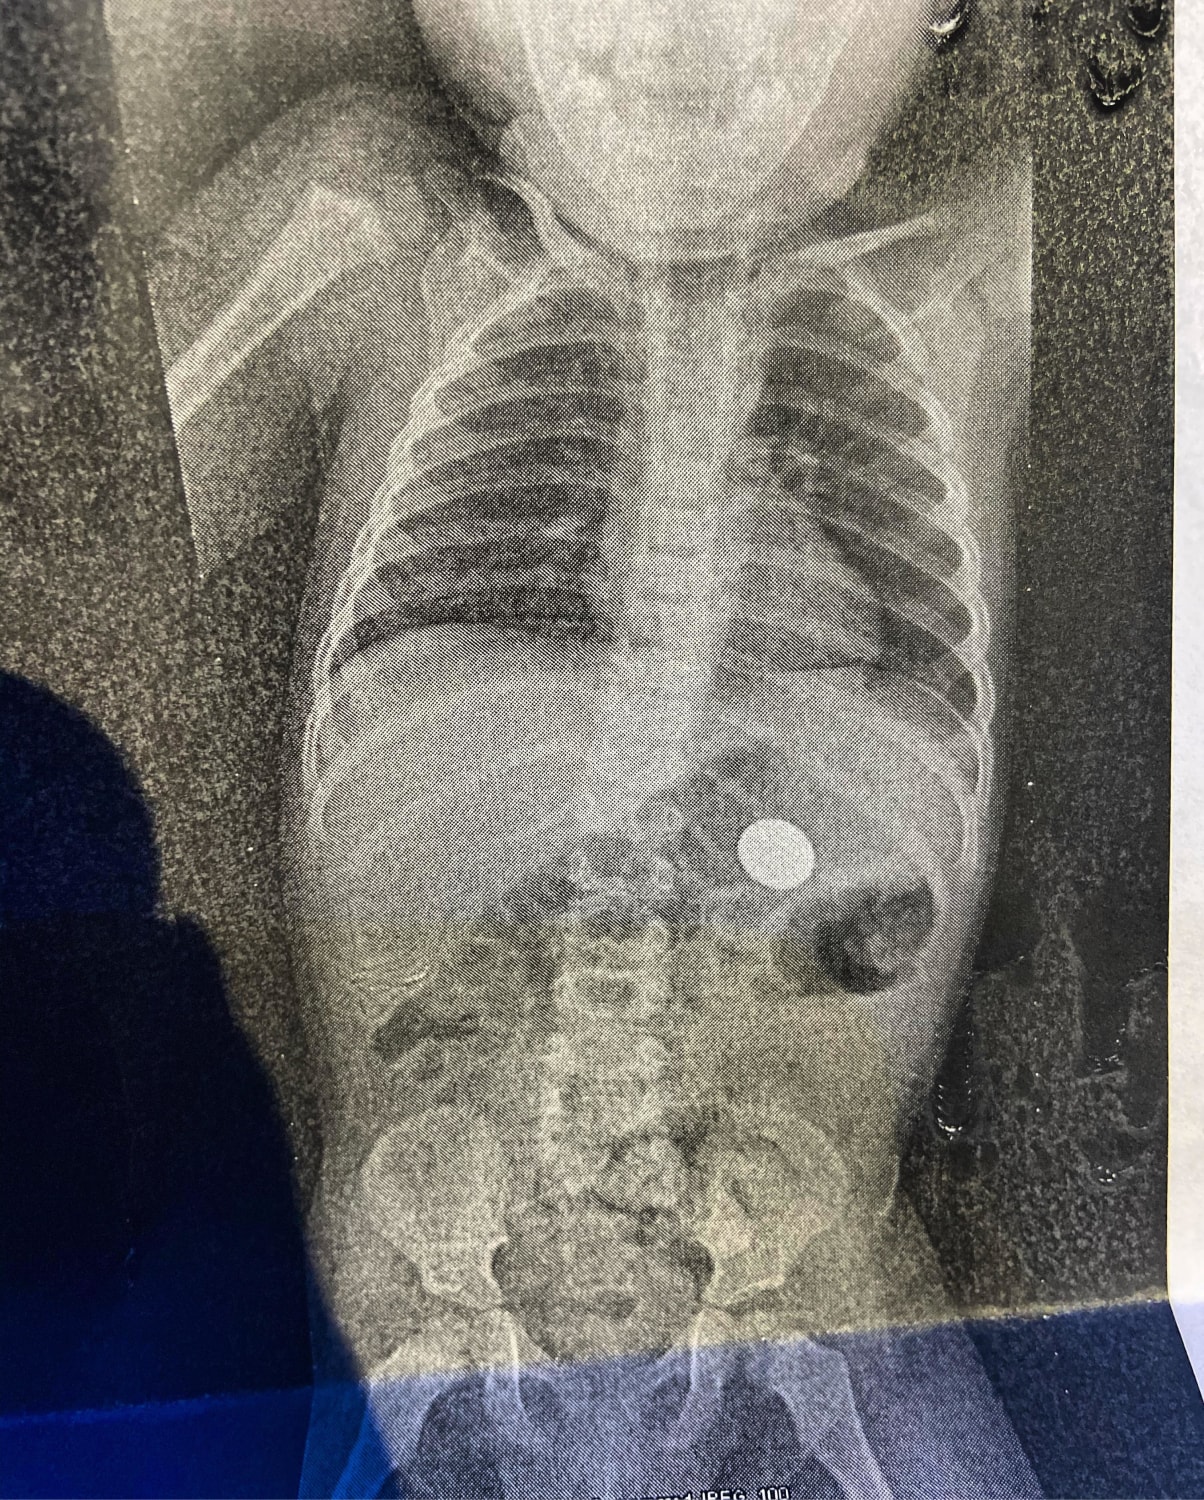 On Valentine’s Day my son decided to show me his first Magic trick how to make a coin disappear............1 X-ray later I found it ‍♂️❤️